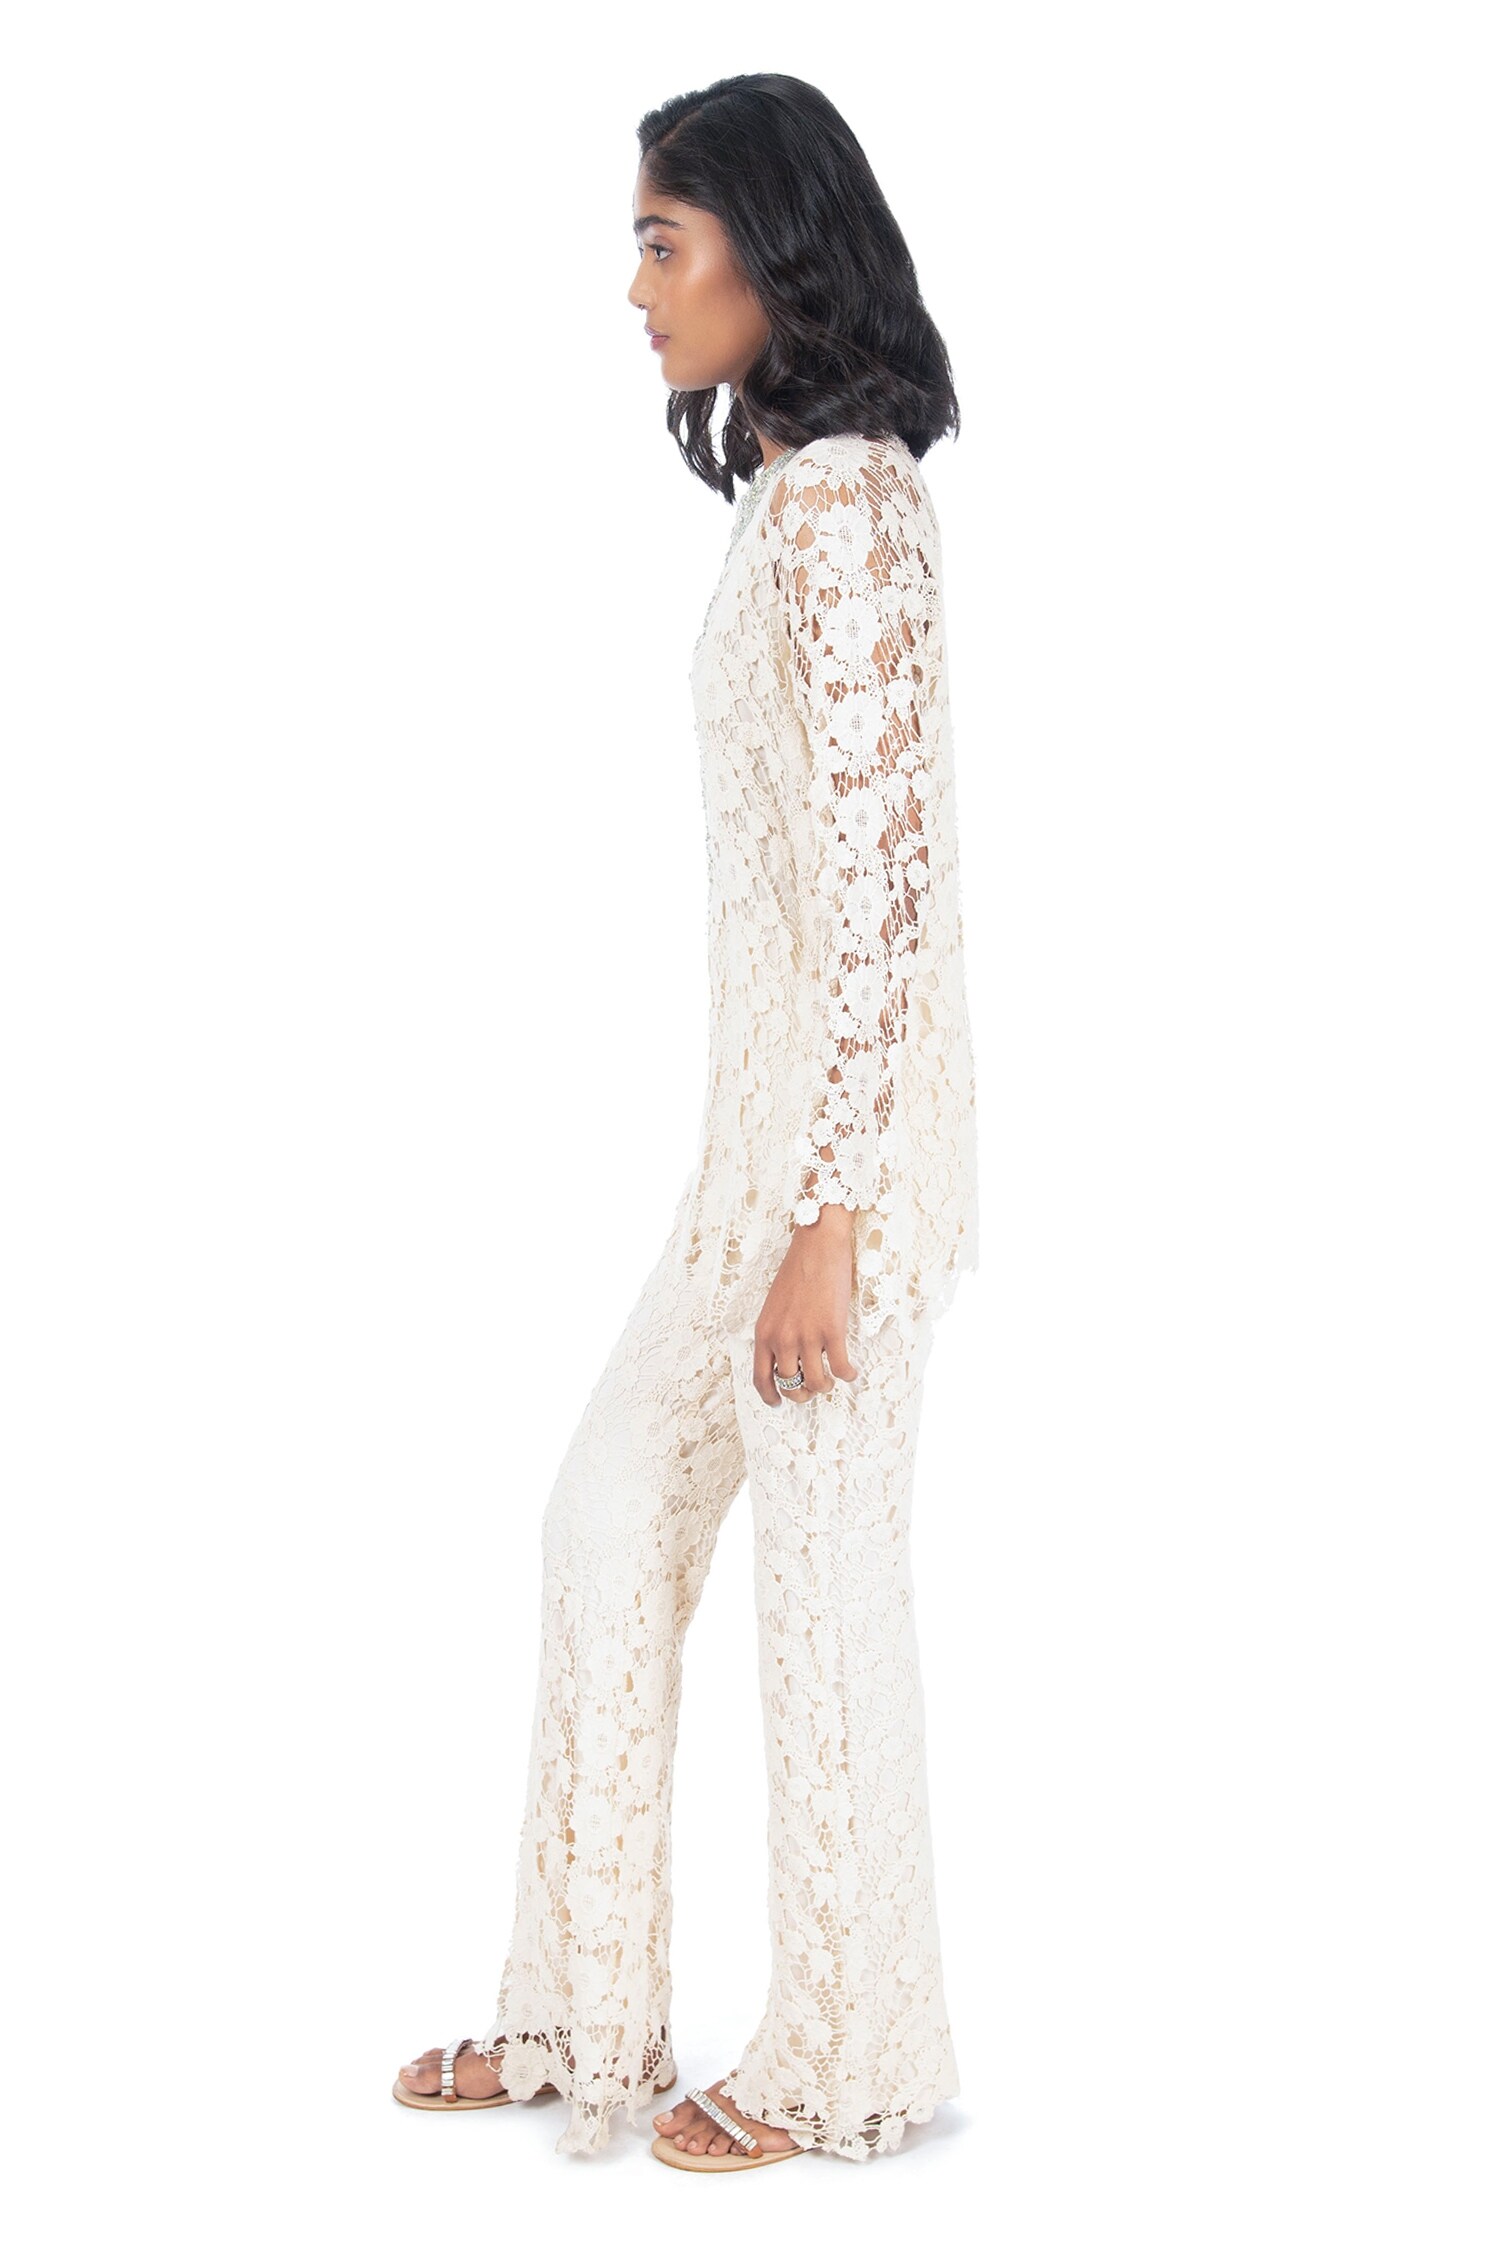 Buy Ivory Lace Embroidered Floral Pattern Notched Tunic And Pant